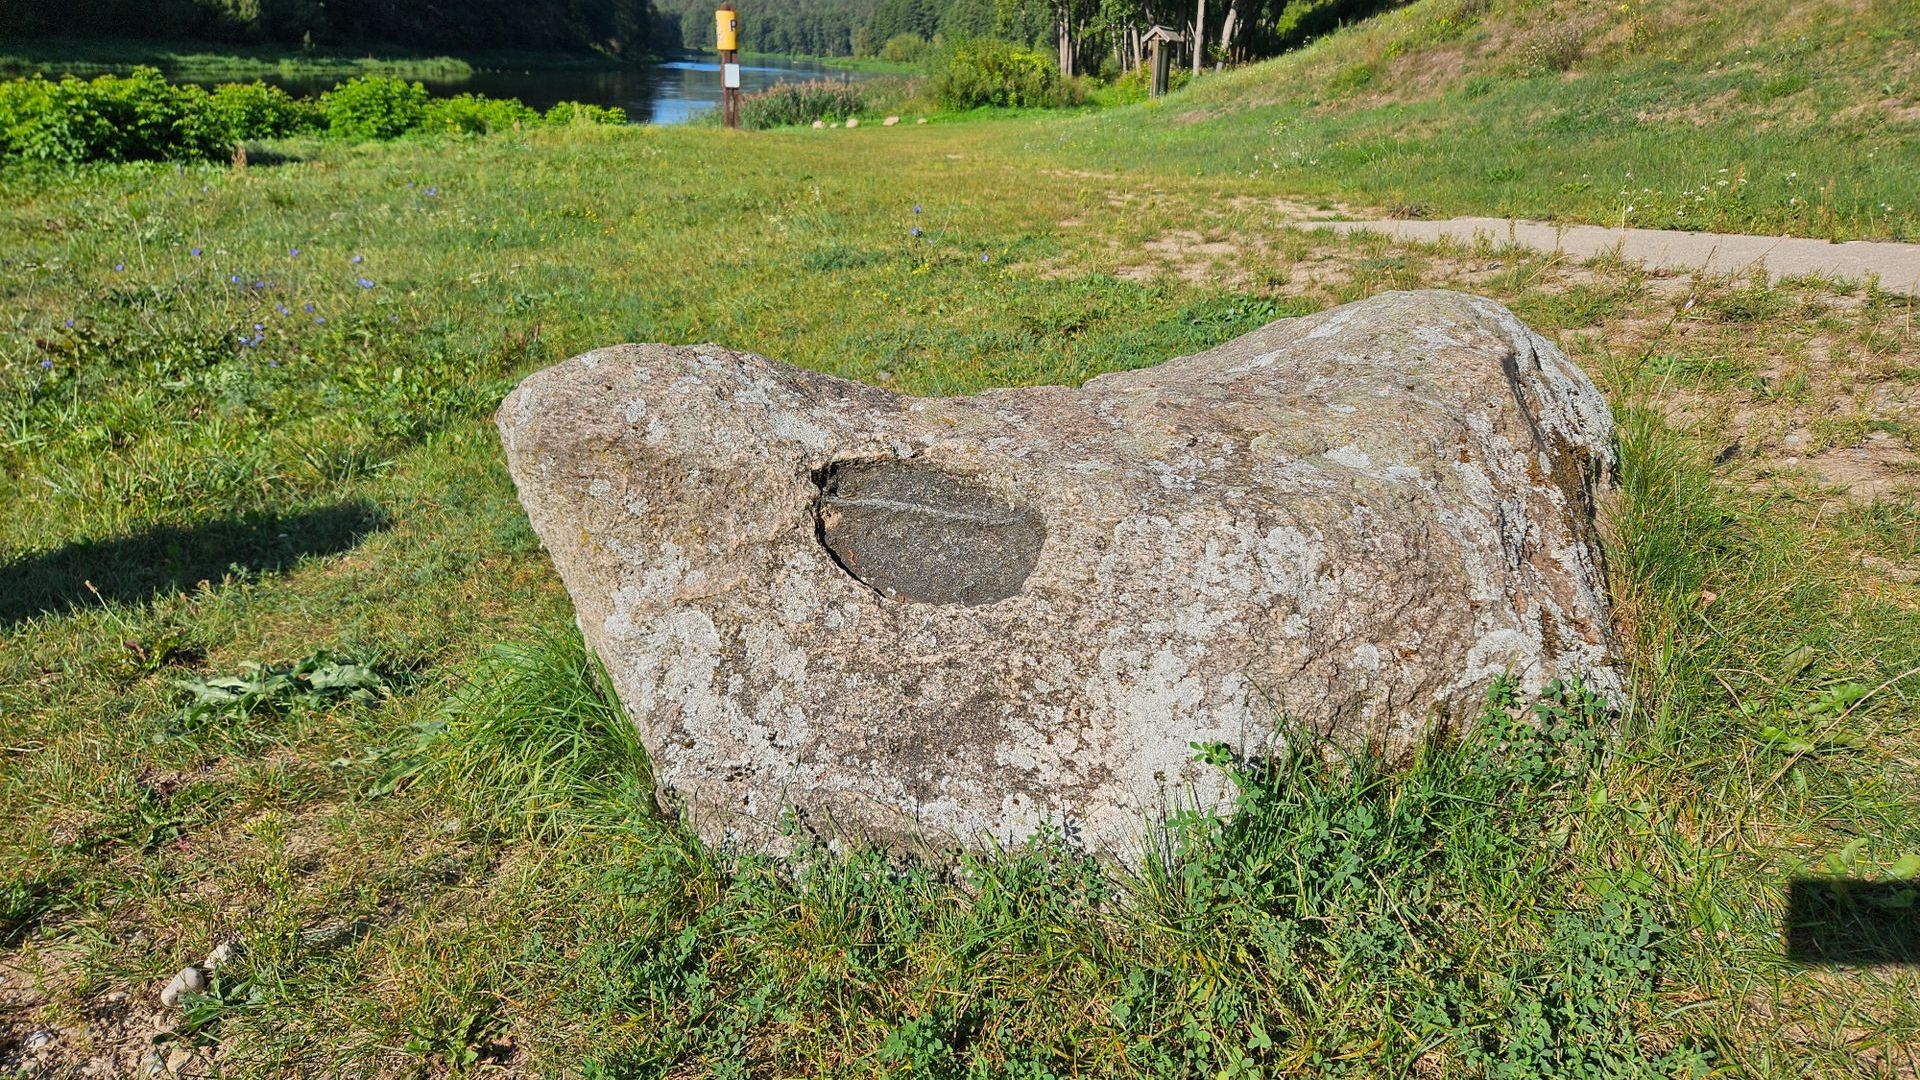 Stone With The Bull's Footprint